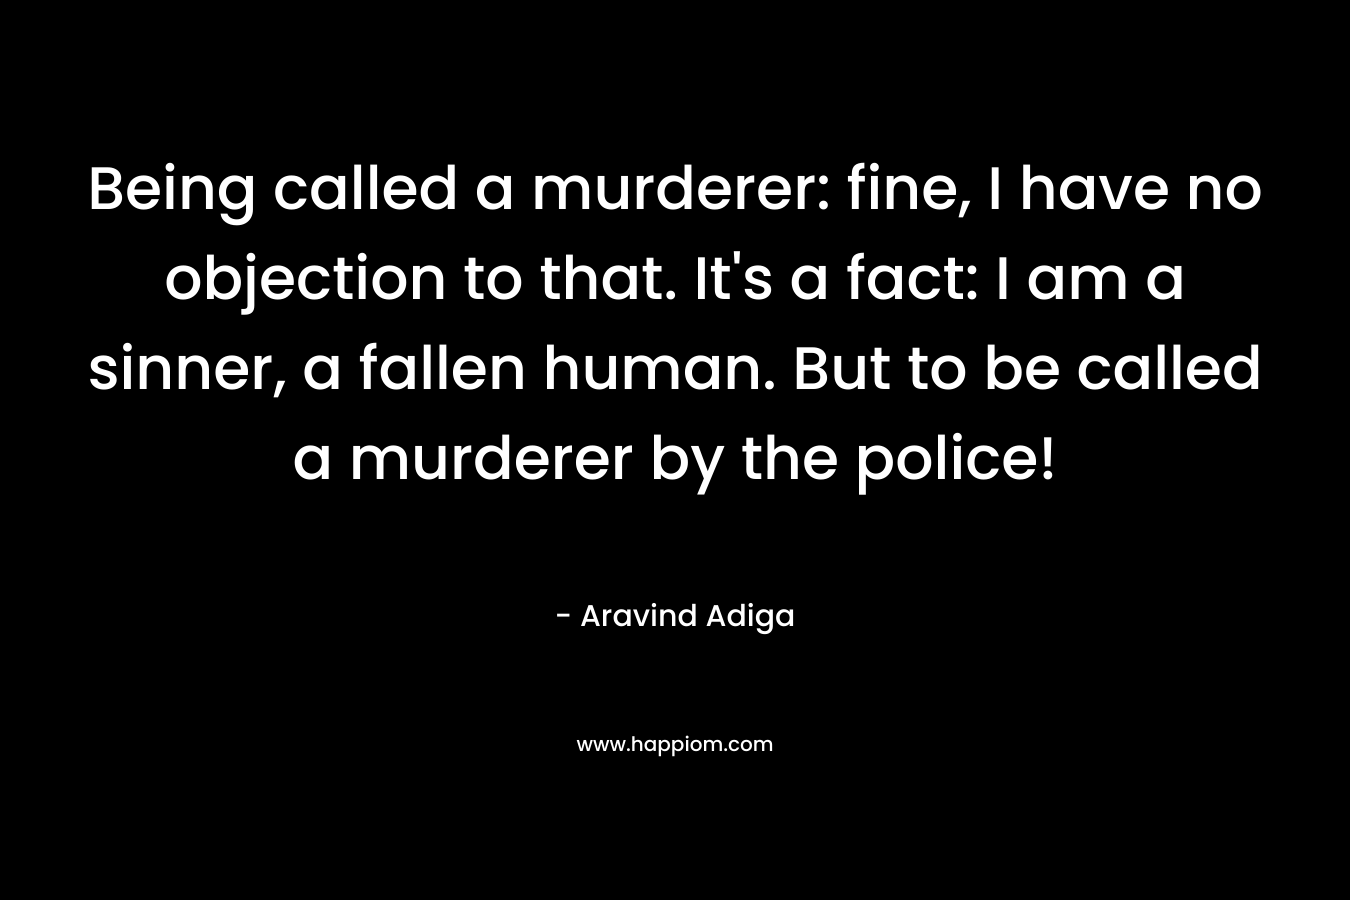 Being called a murderer: fine, I have no objection to that. It's a fact: I am a sinner, a fallen human. But to be called a murderer by the police!